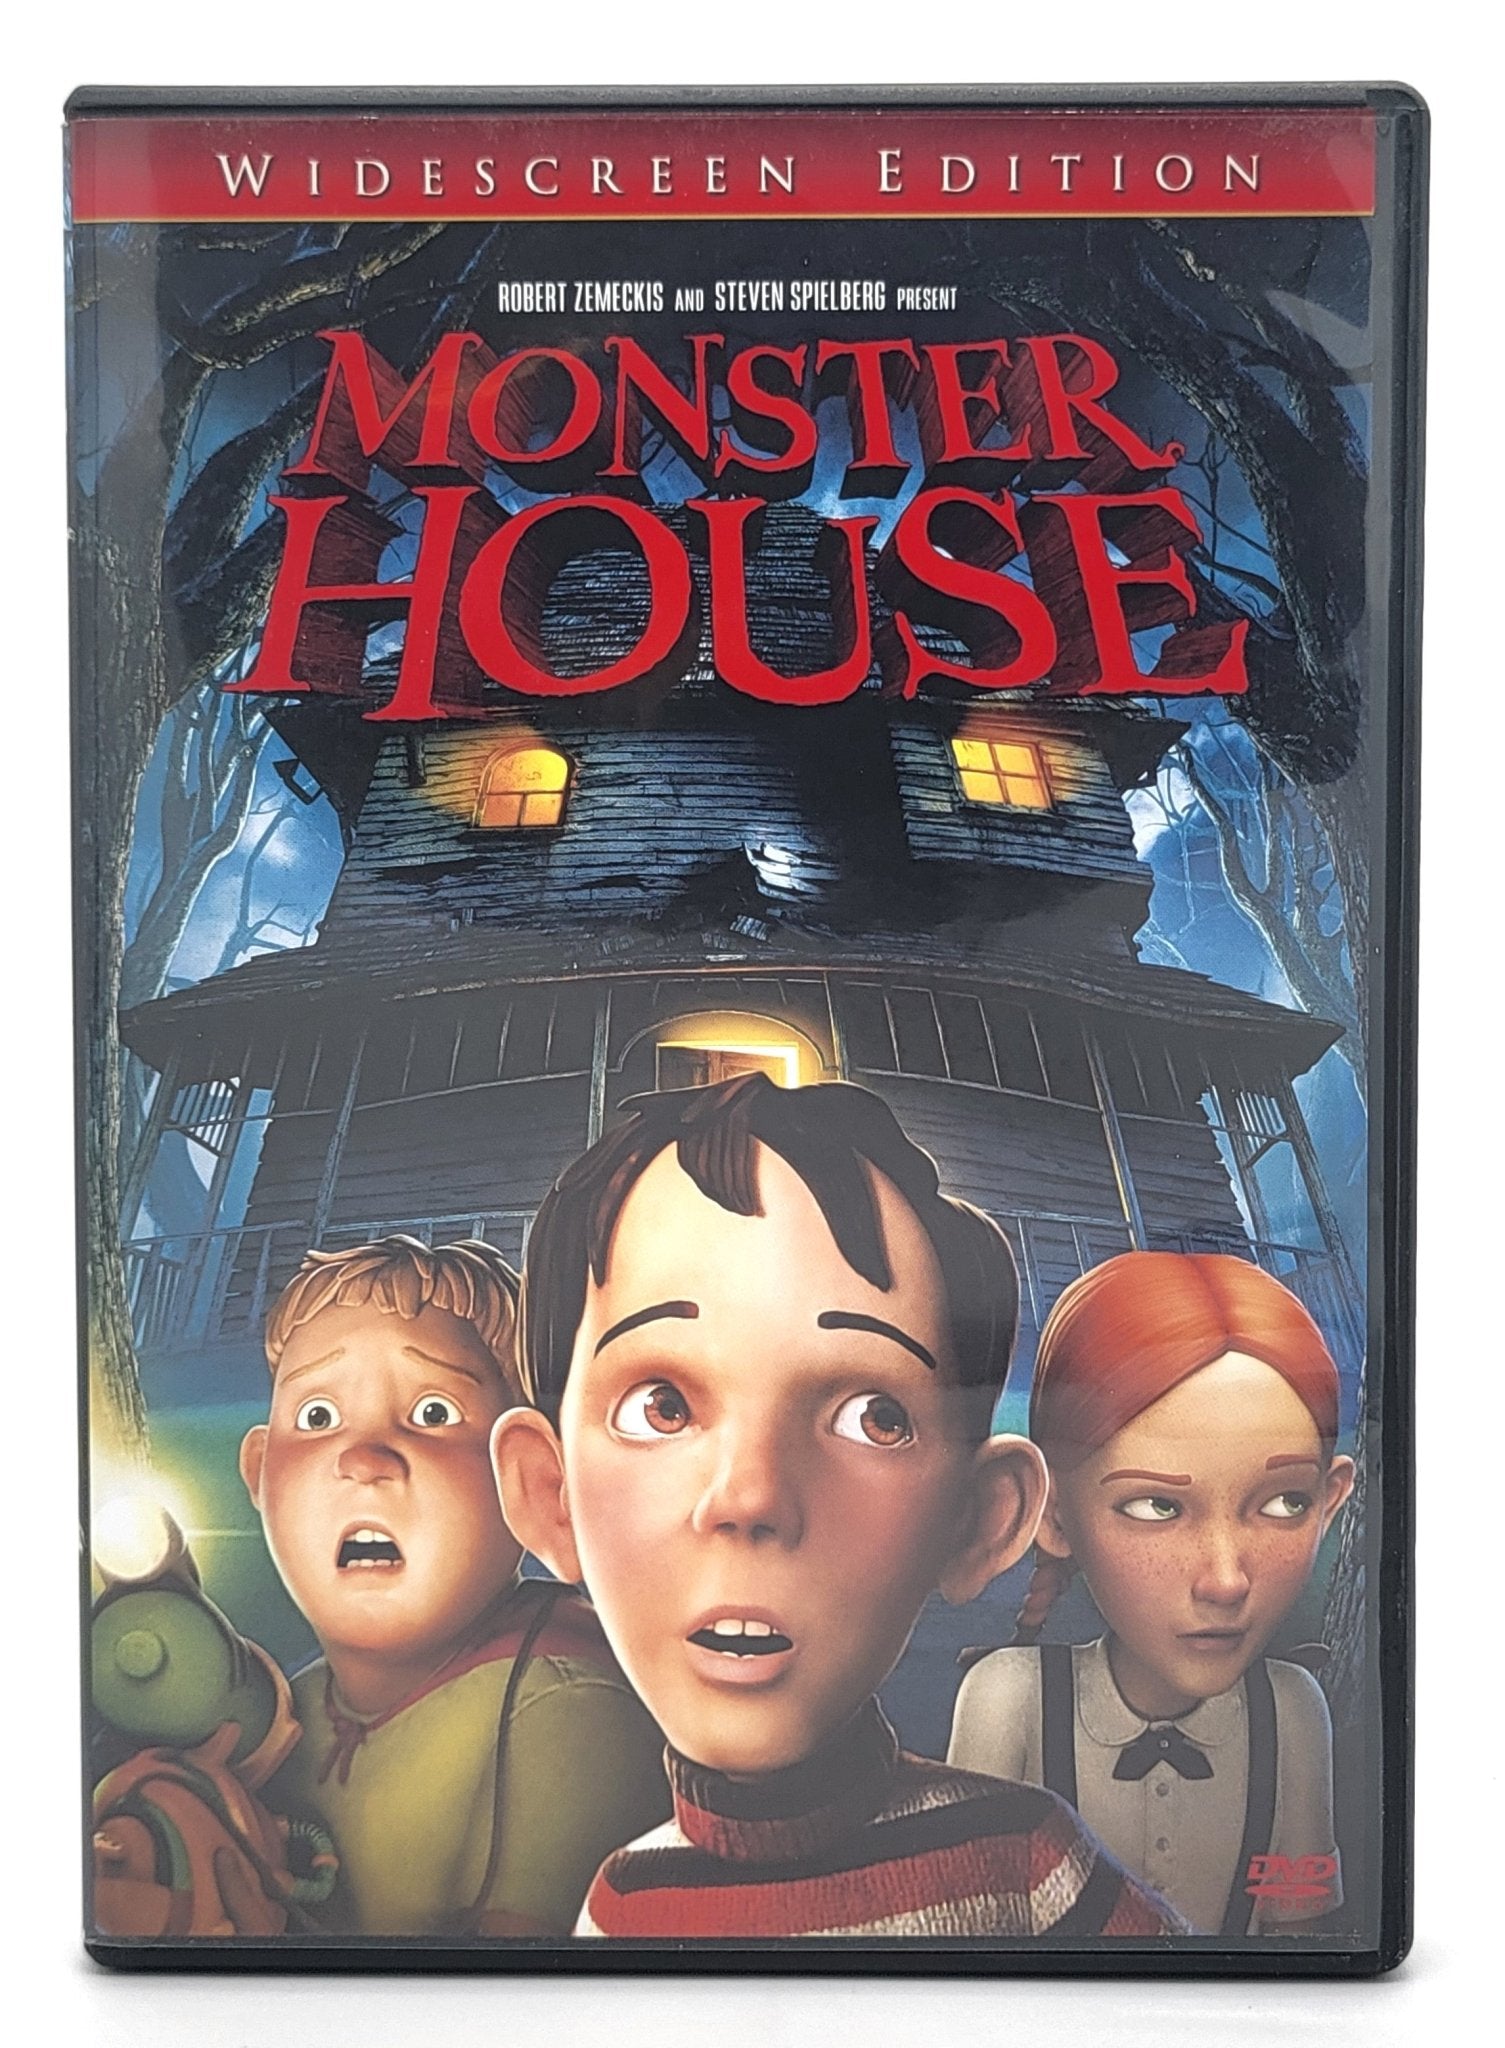 Columbia Pictures - Monster House | DVD | Widescreen - DVD - Steady Bunny Shop